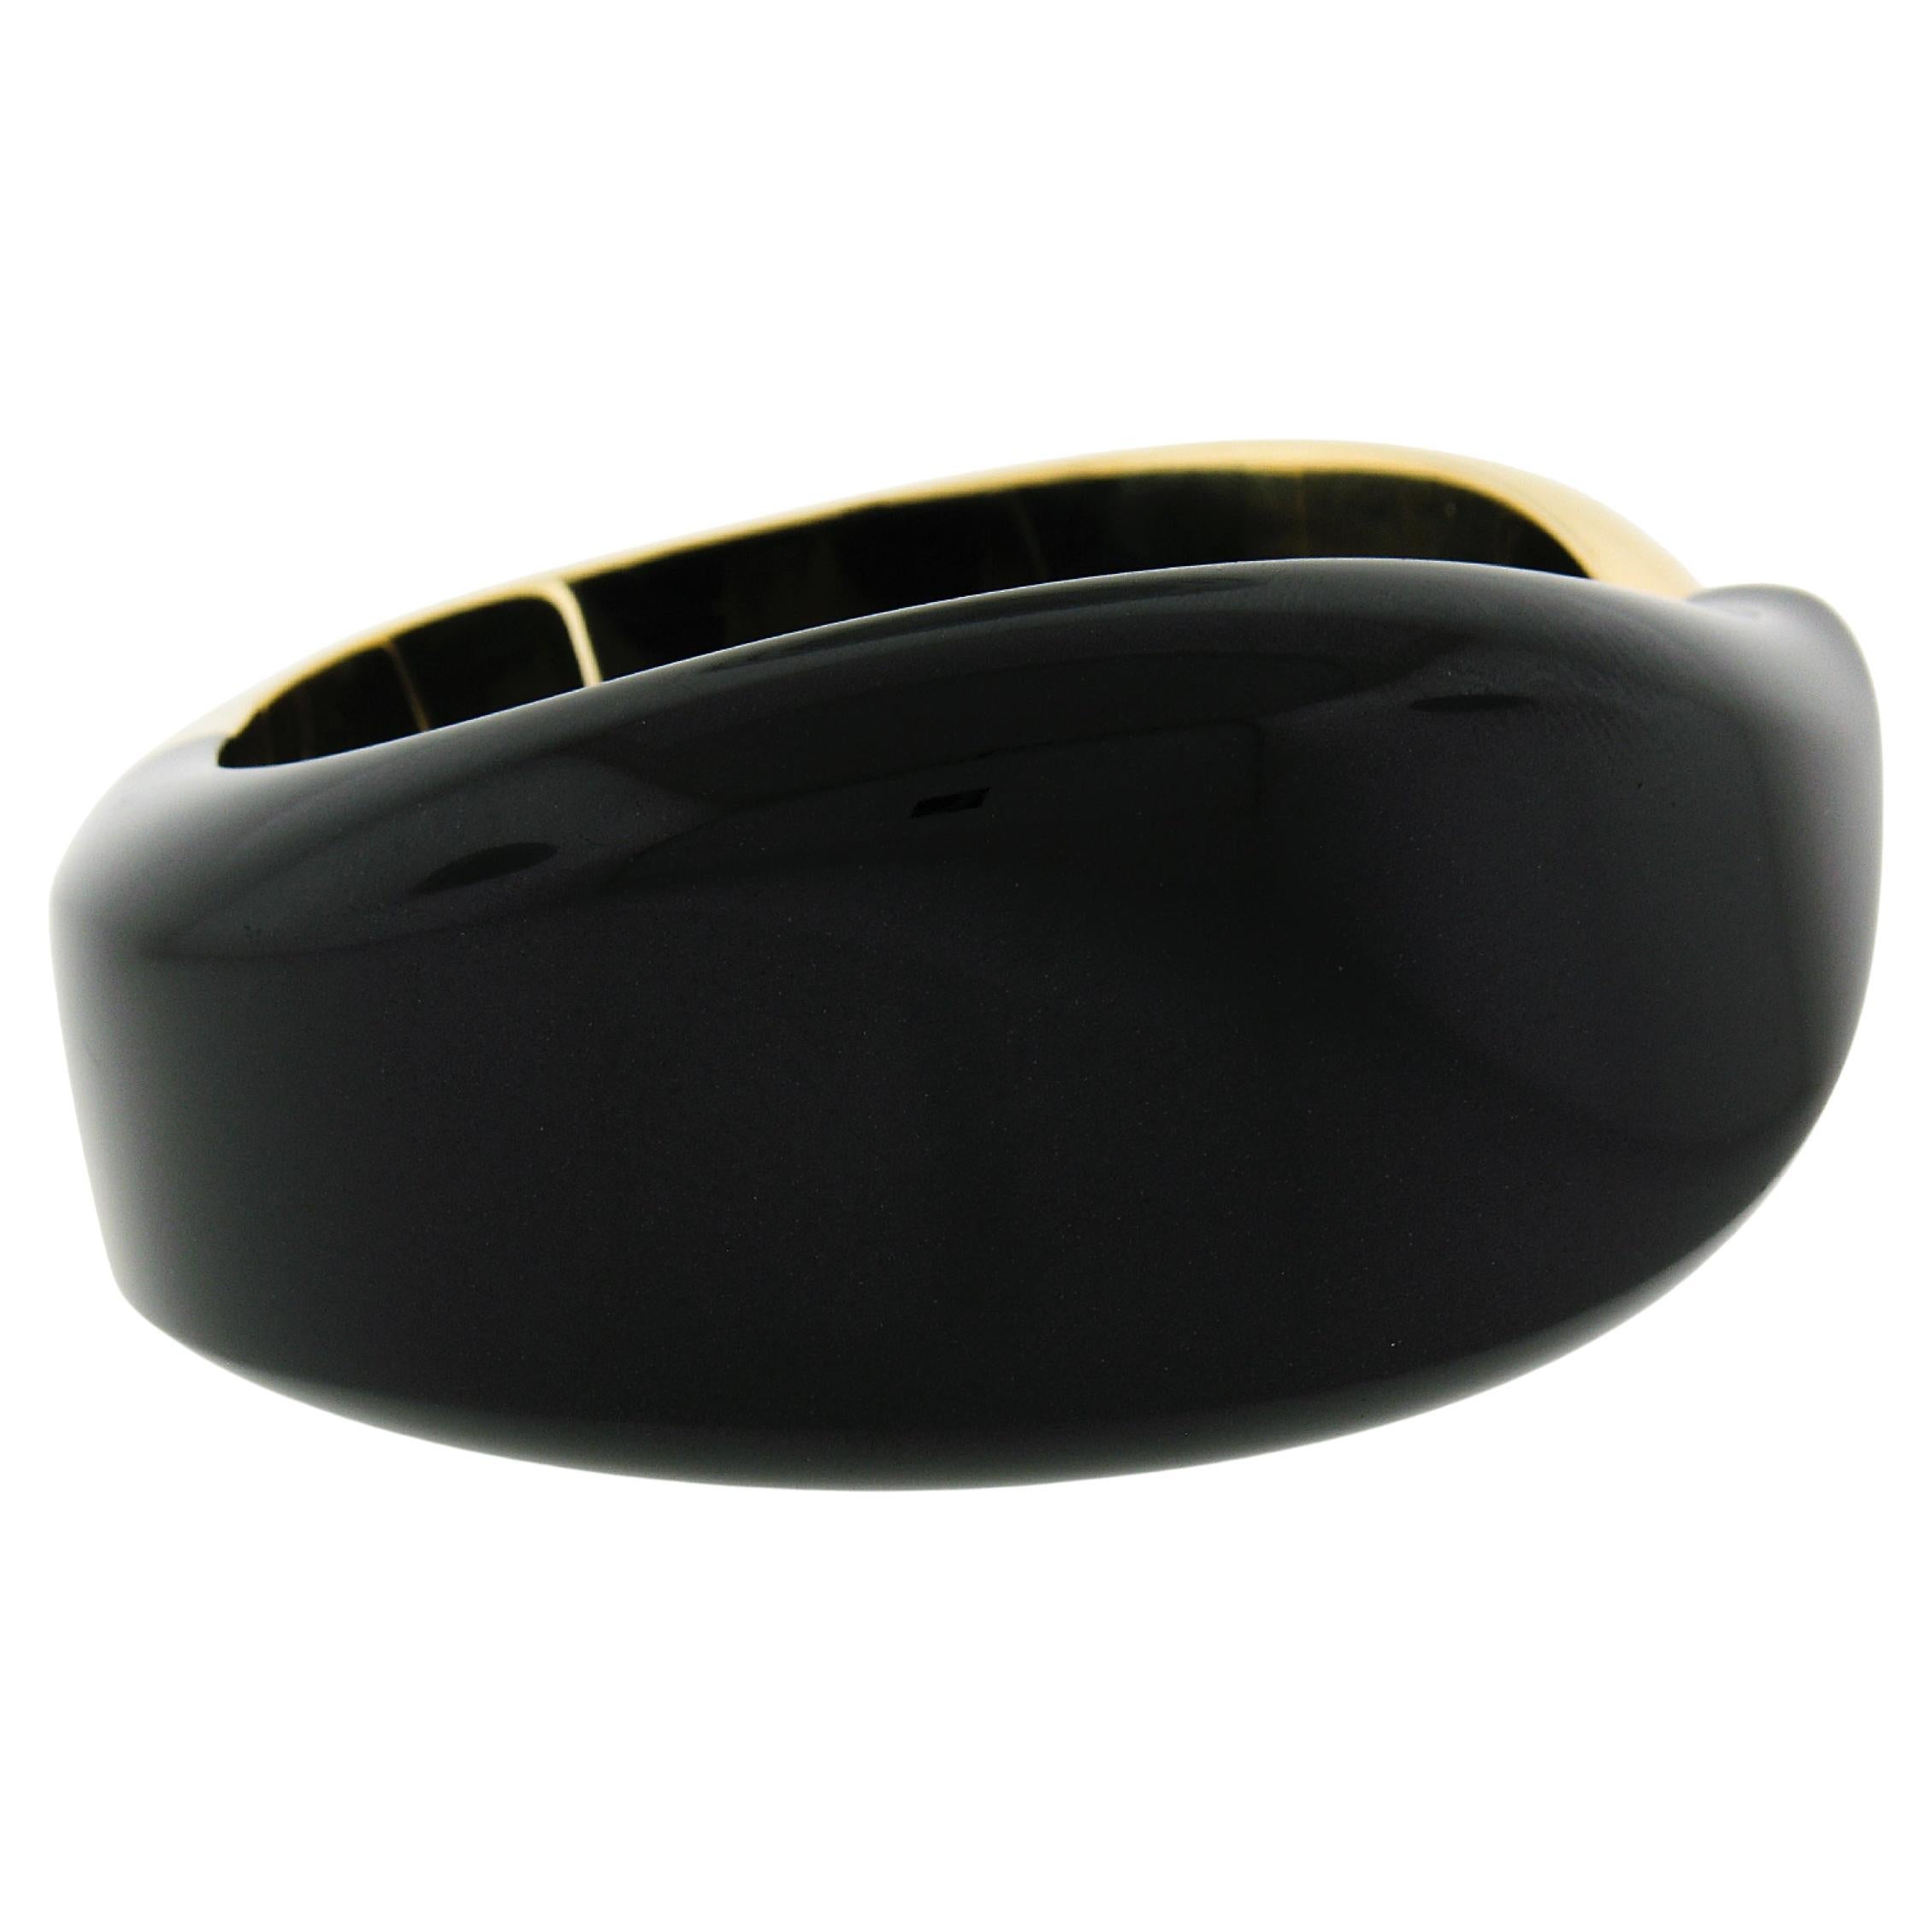 Material: 18k Yellow Gold & Black Jade
Weight: 107.14 Grams
Bracelet Type: Hinged Bangle Cuff Bracelet
Length: Will fit up to a 6.7 inch wrist
Width: 30mm (1.19 in) 
Thickness: 8.1mm rise off the wrist
Signature(s): Tiffany & Co. ©Elsa Peretti 750